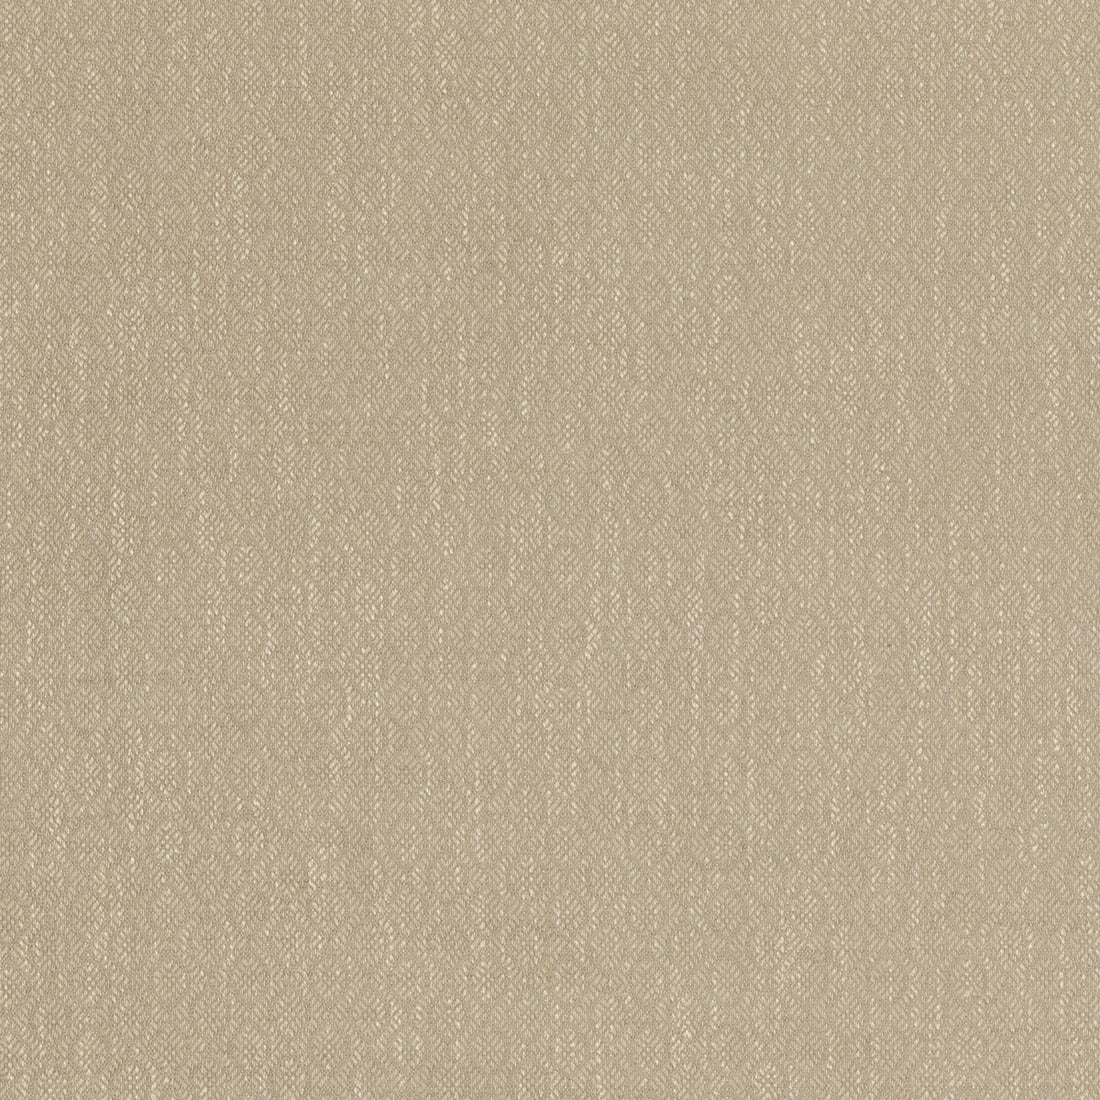 Orchard fabric in stone color - pattern PF50488.140.0 - by Baker Lifestyle in the Block Weaves collection